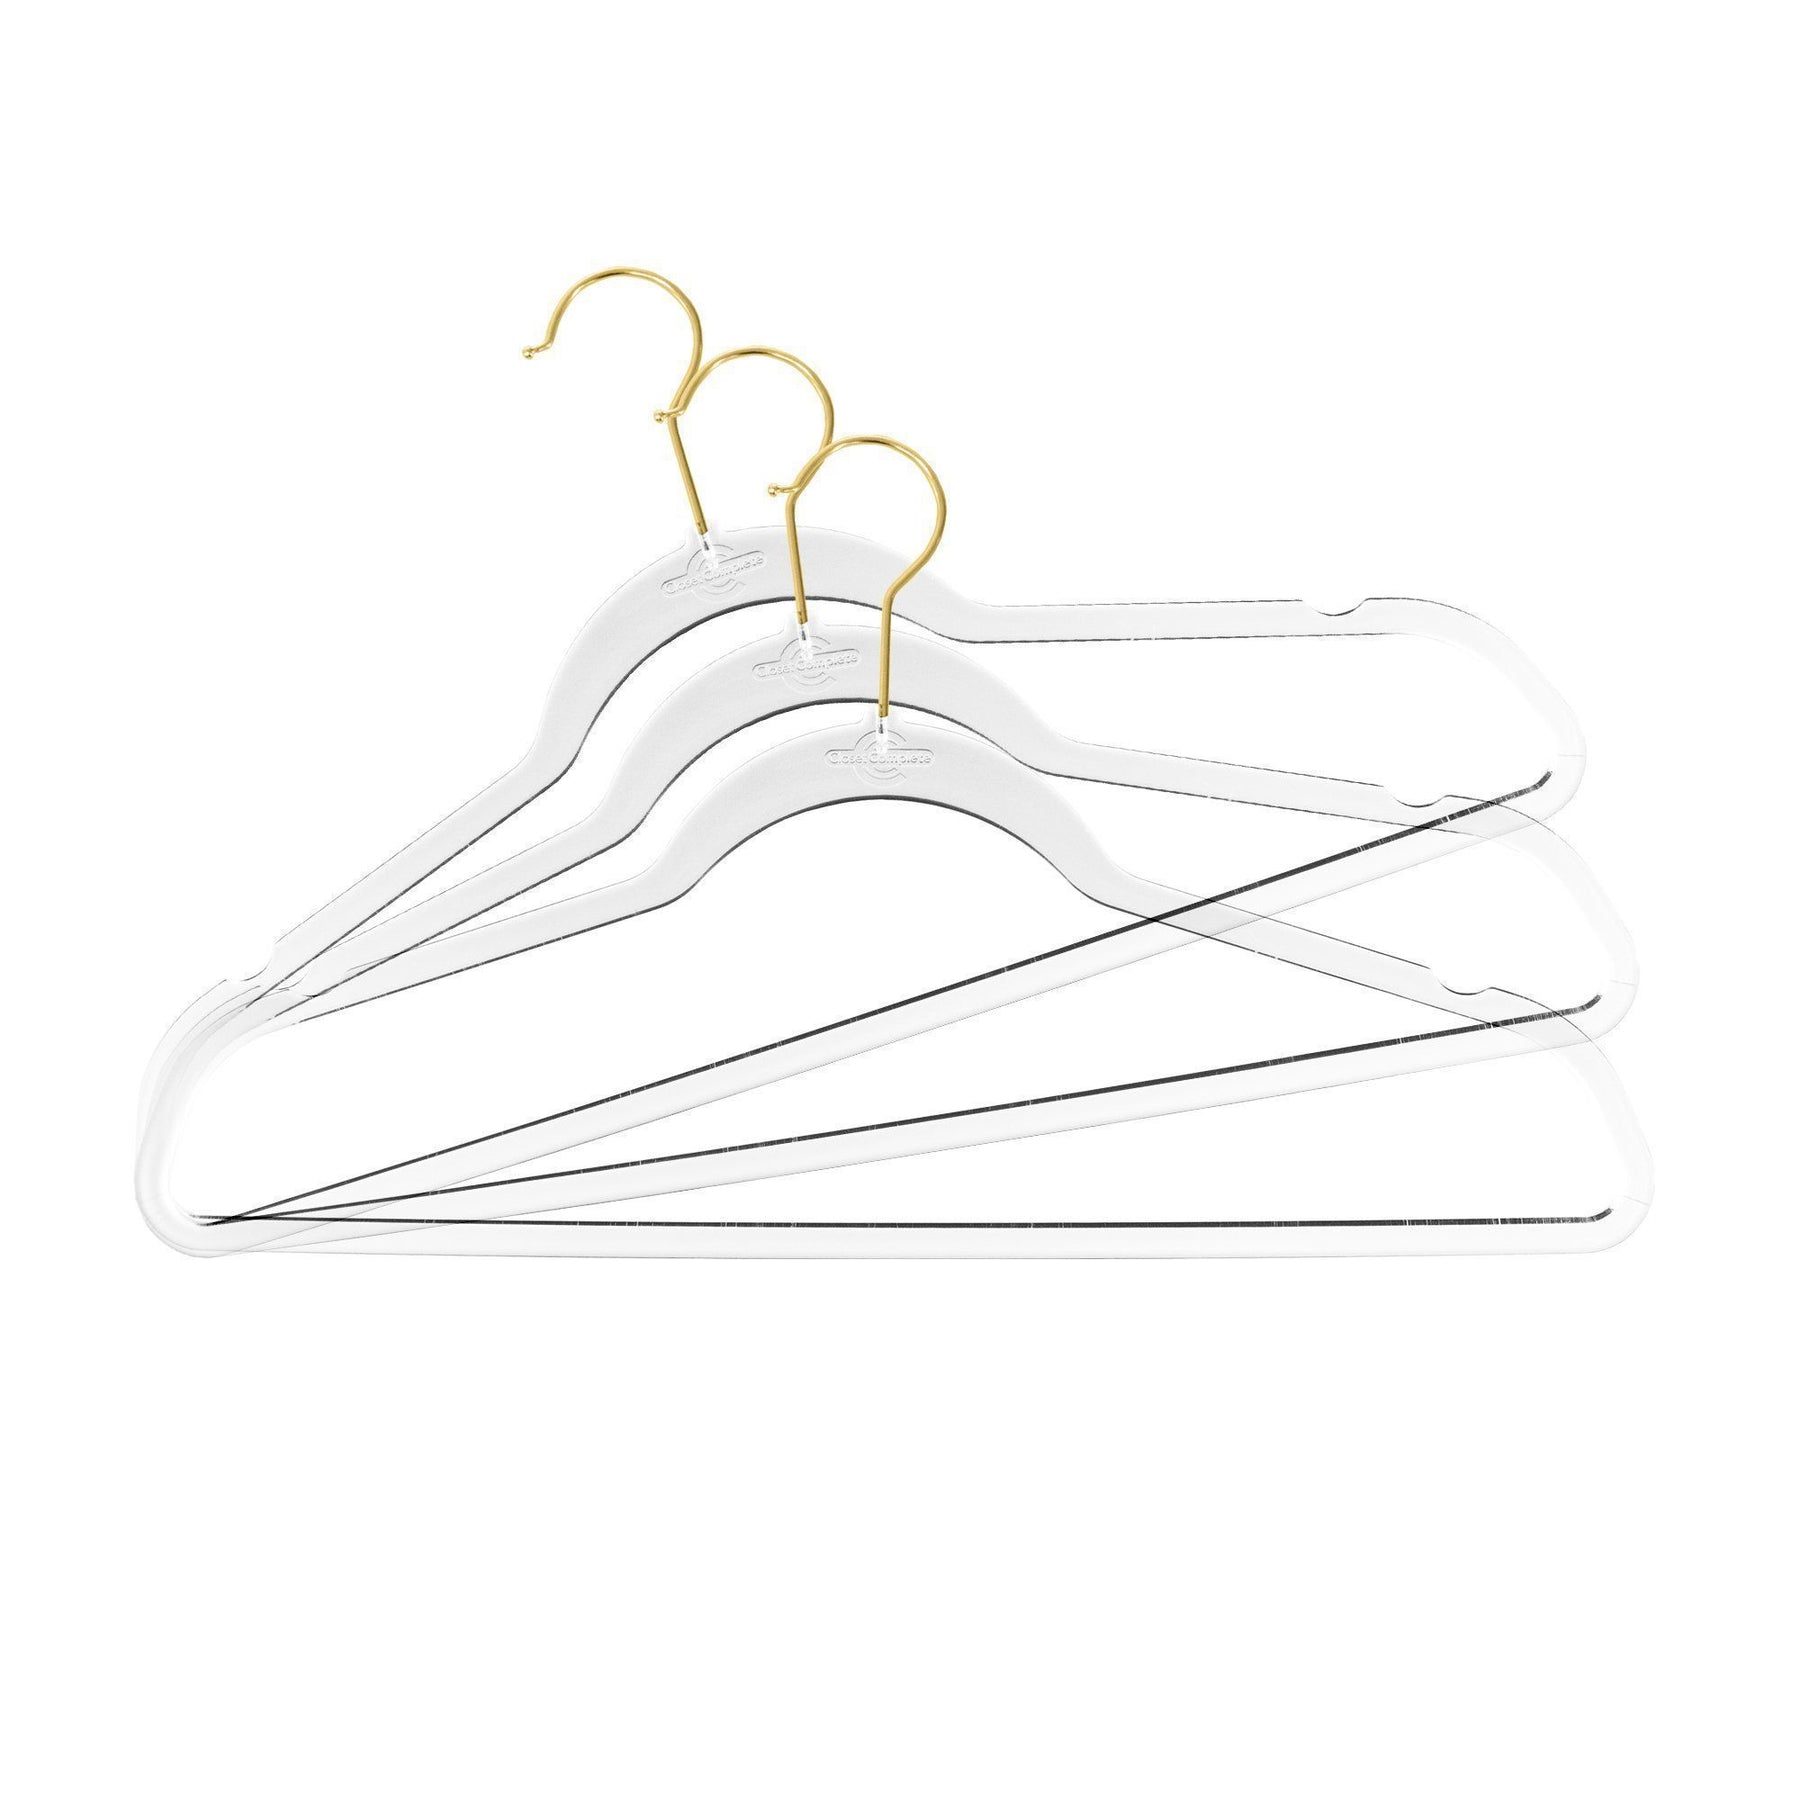 Quality Hangers 5 Pack 12.5 Inches Kids Size Acrylic Hangers – Crystal Clear Hangers for Kids Clothes 7-10 Years Old with Wide Matte Gold Metallic